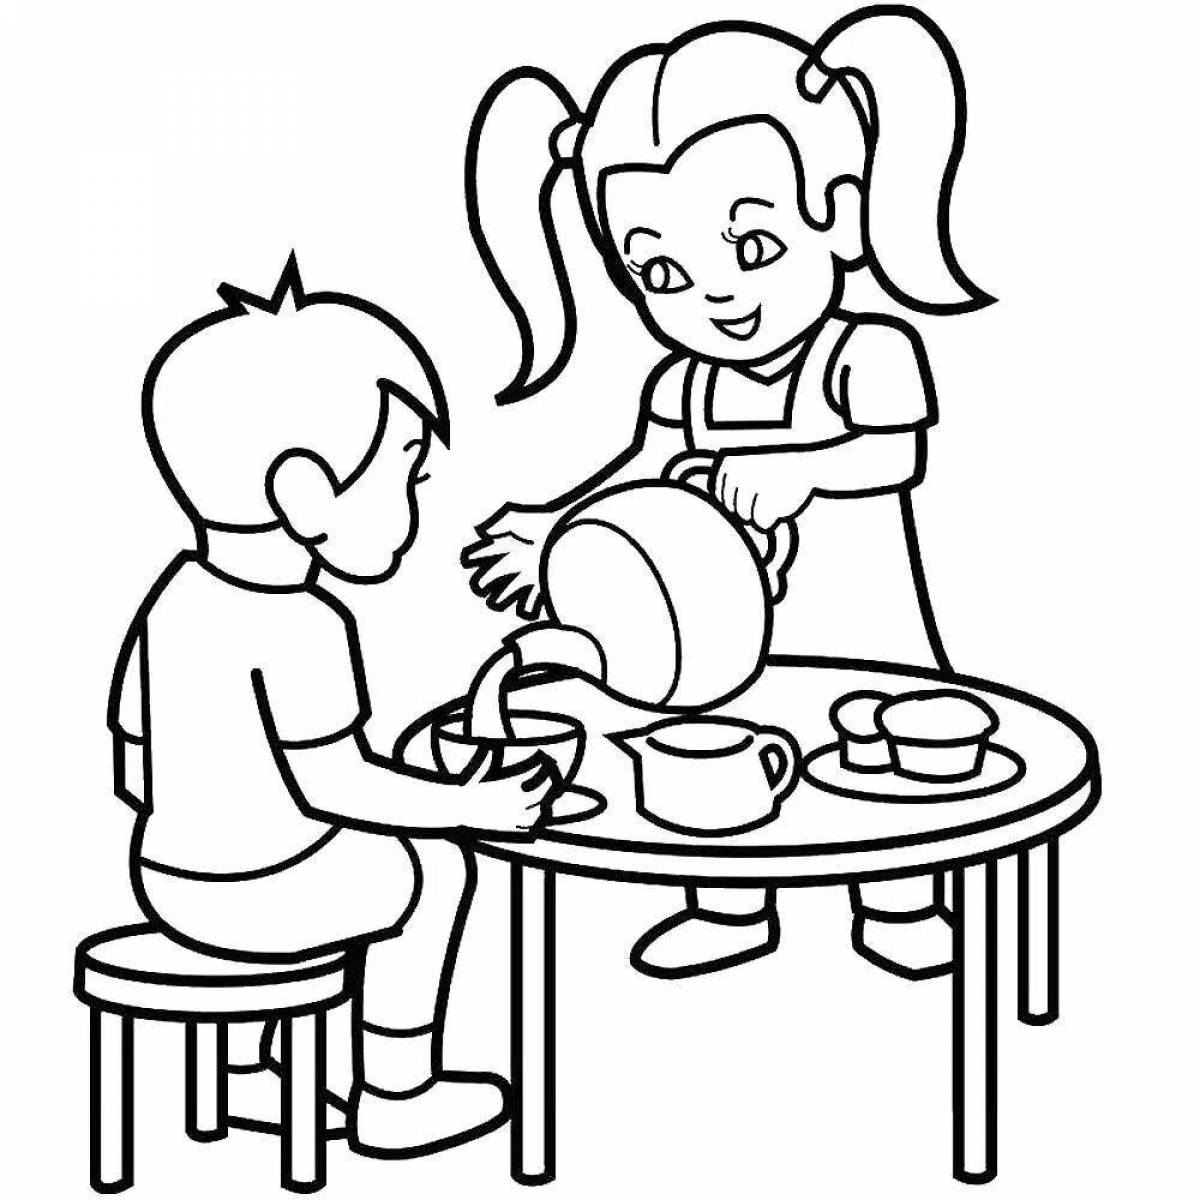 Colouring colorful table manners